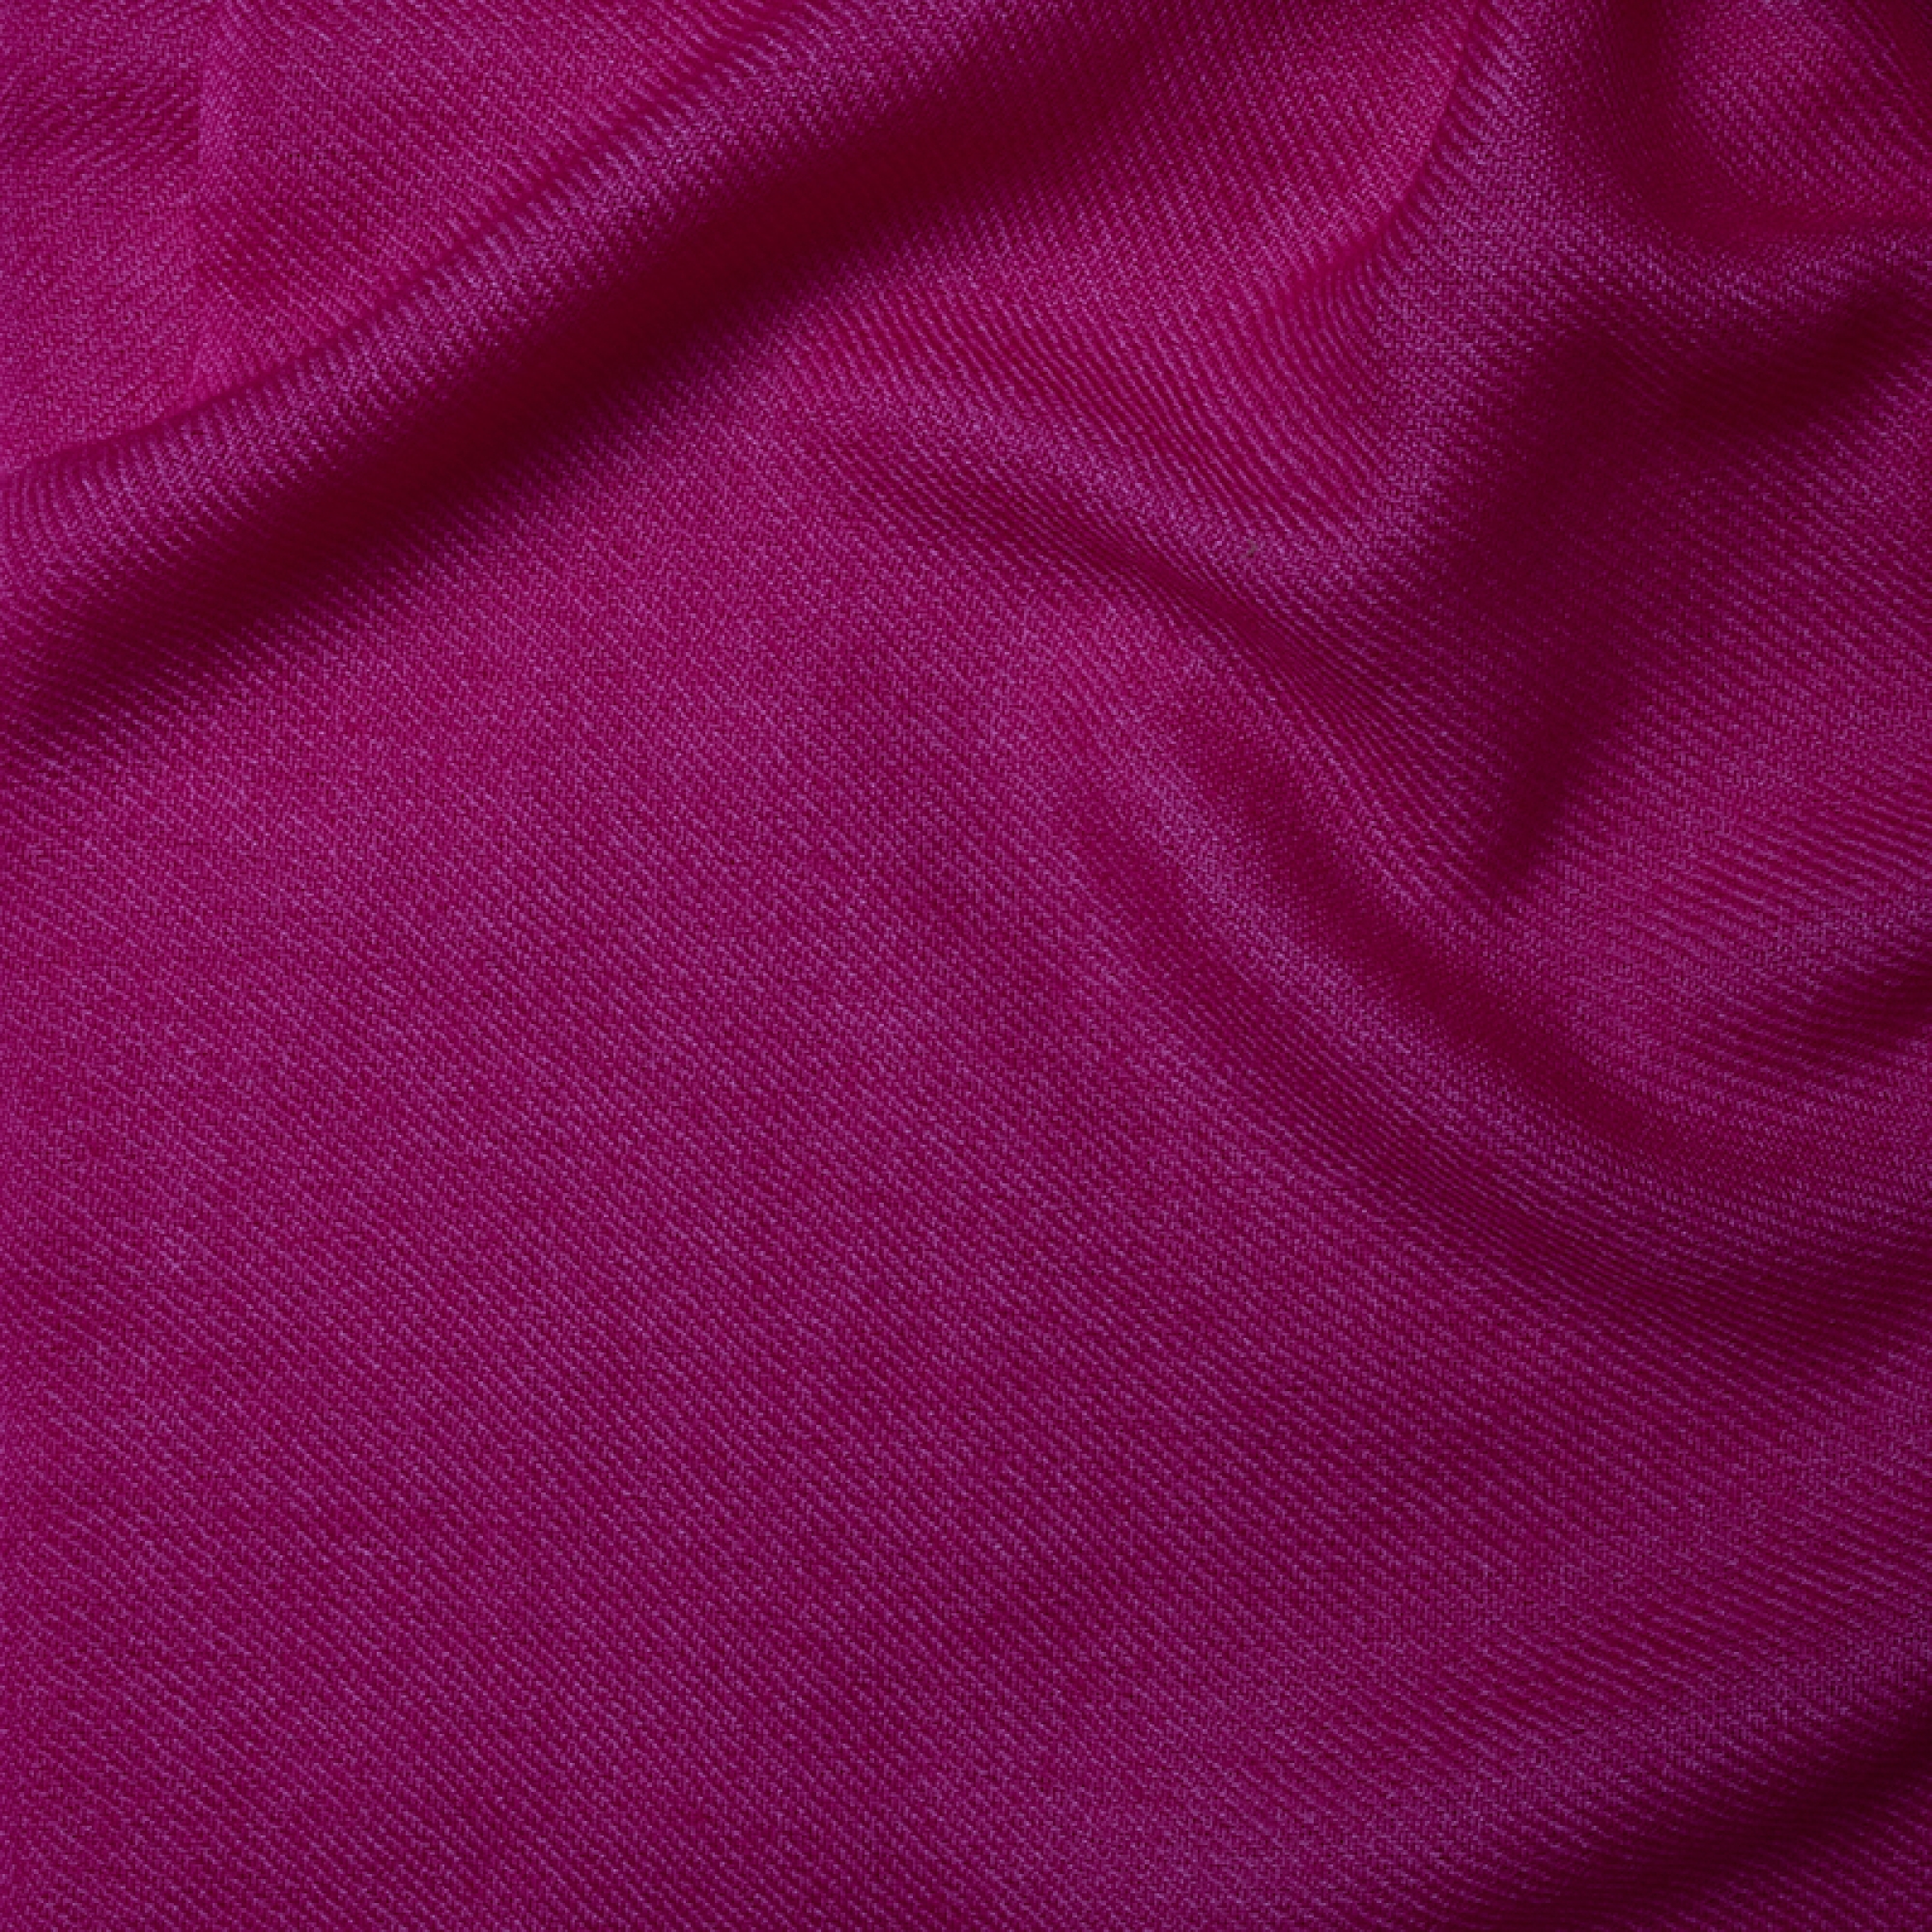 Cashmere accessories exclusive toodoo plain xl 240 x 260 flashing pink 240 x 260 cm